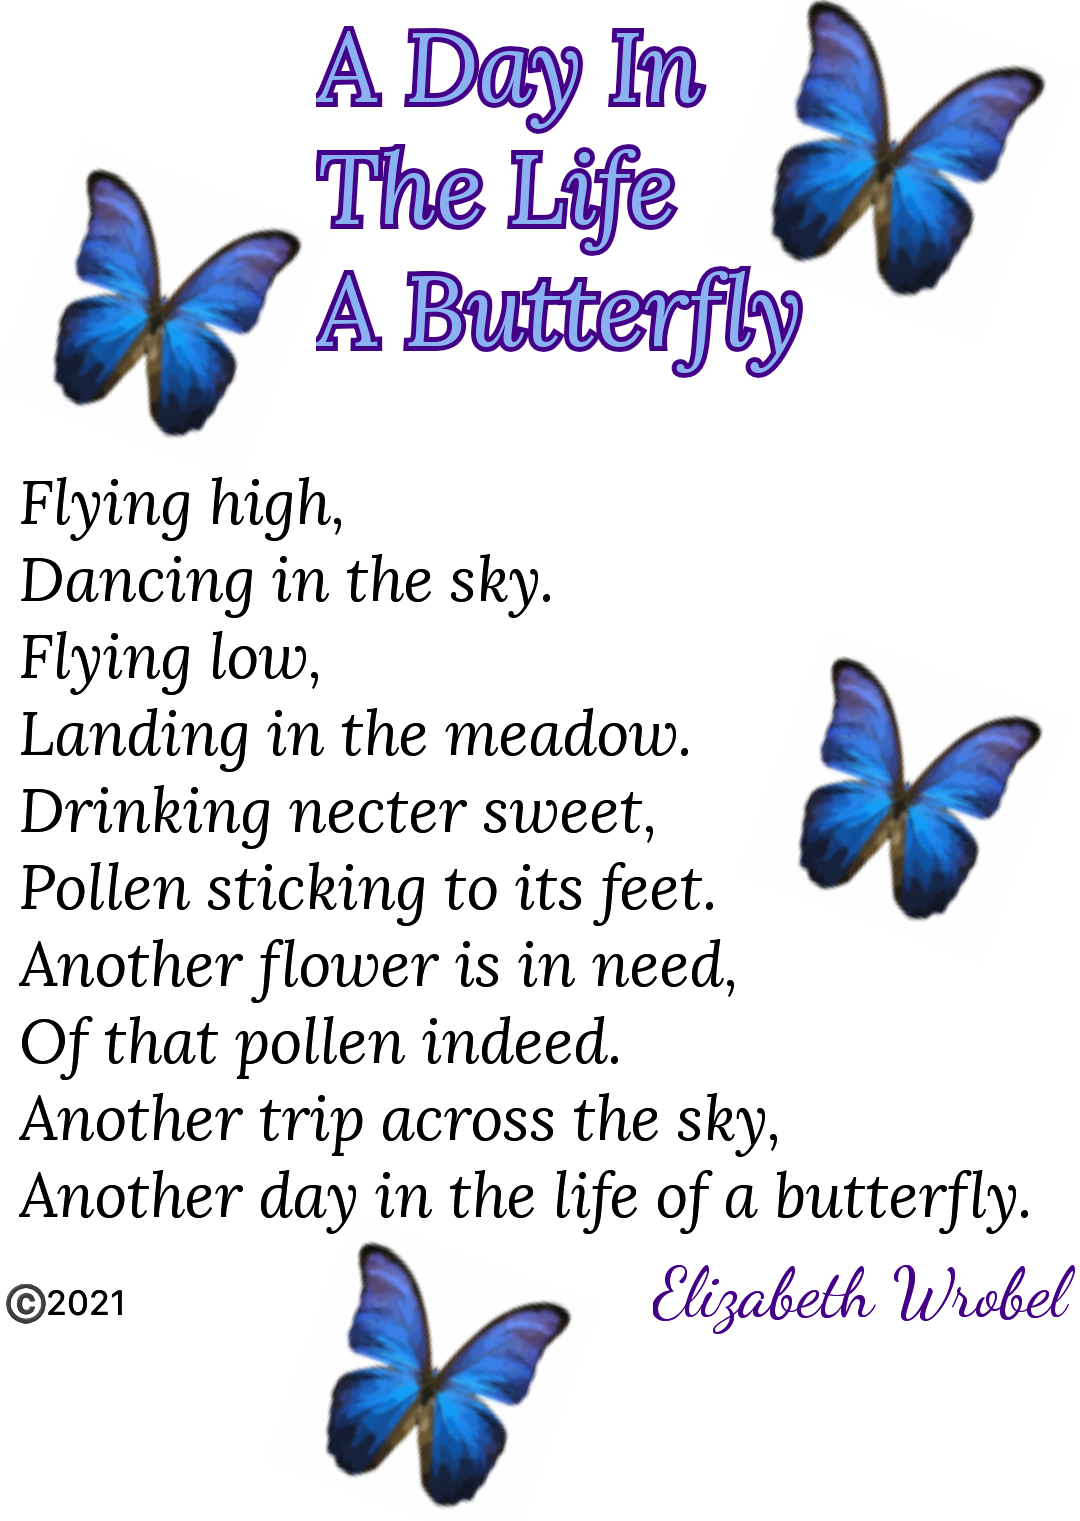 A Day In The Life Of A Butterfly a high flying rhyme by Elizabeth Wrobel